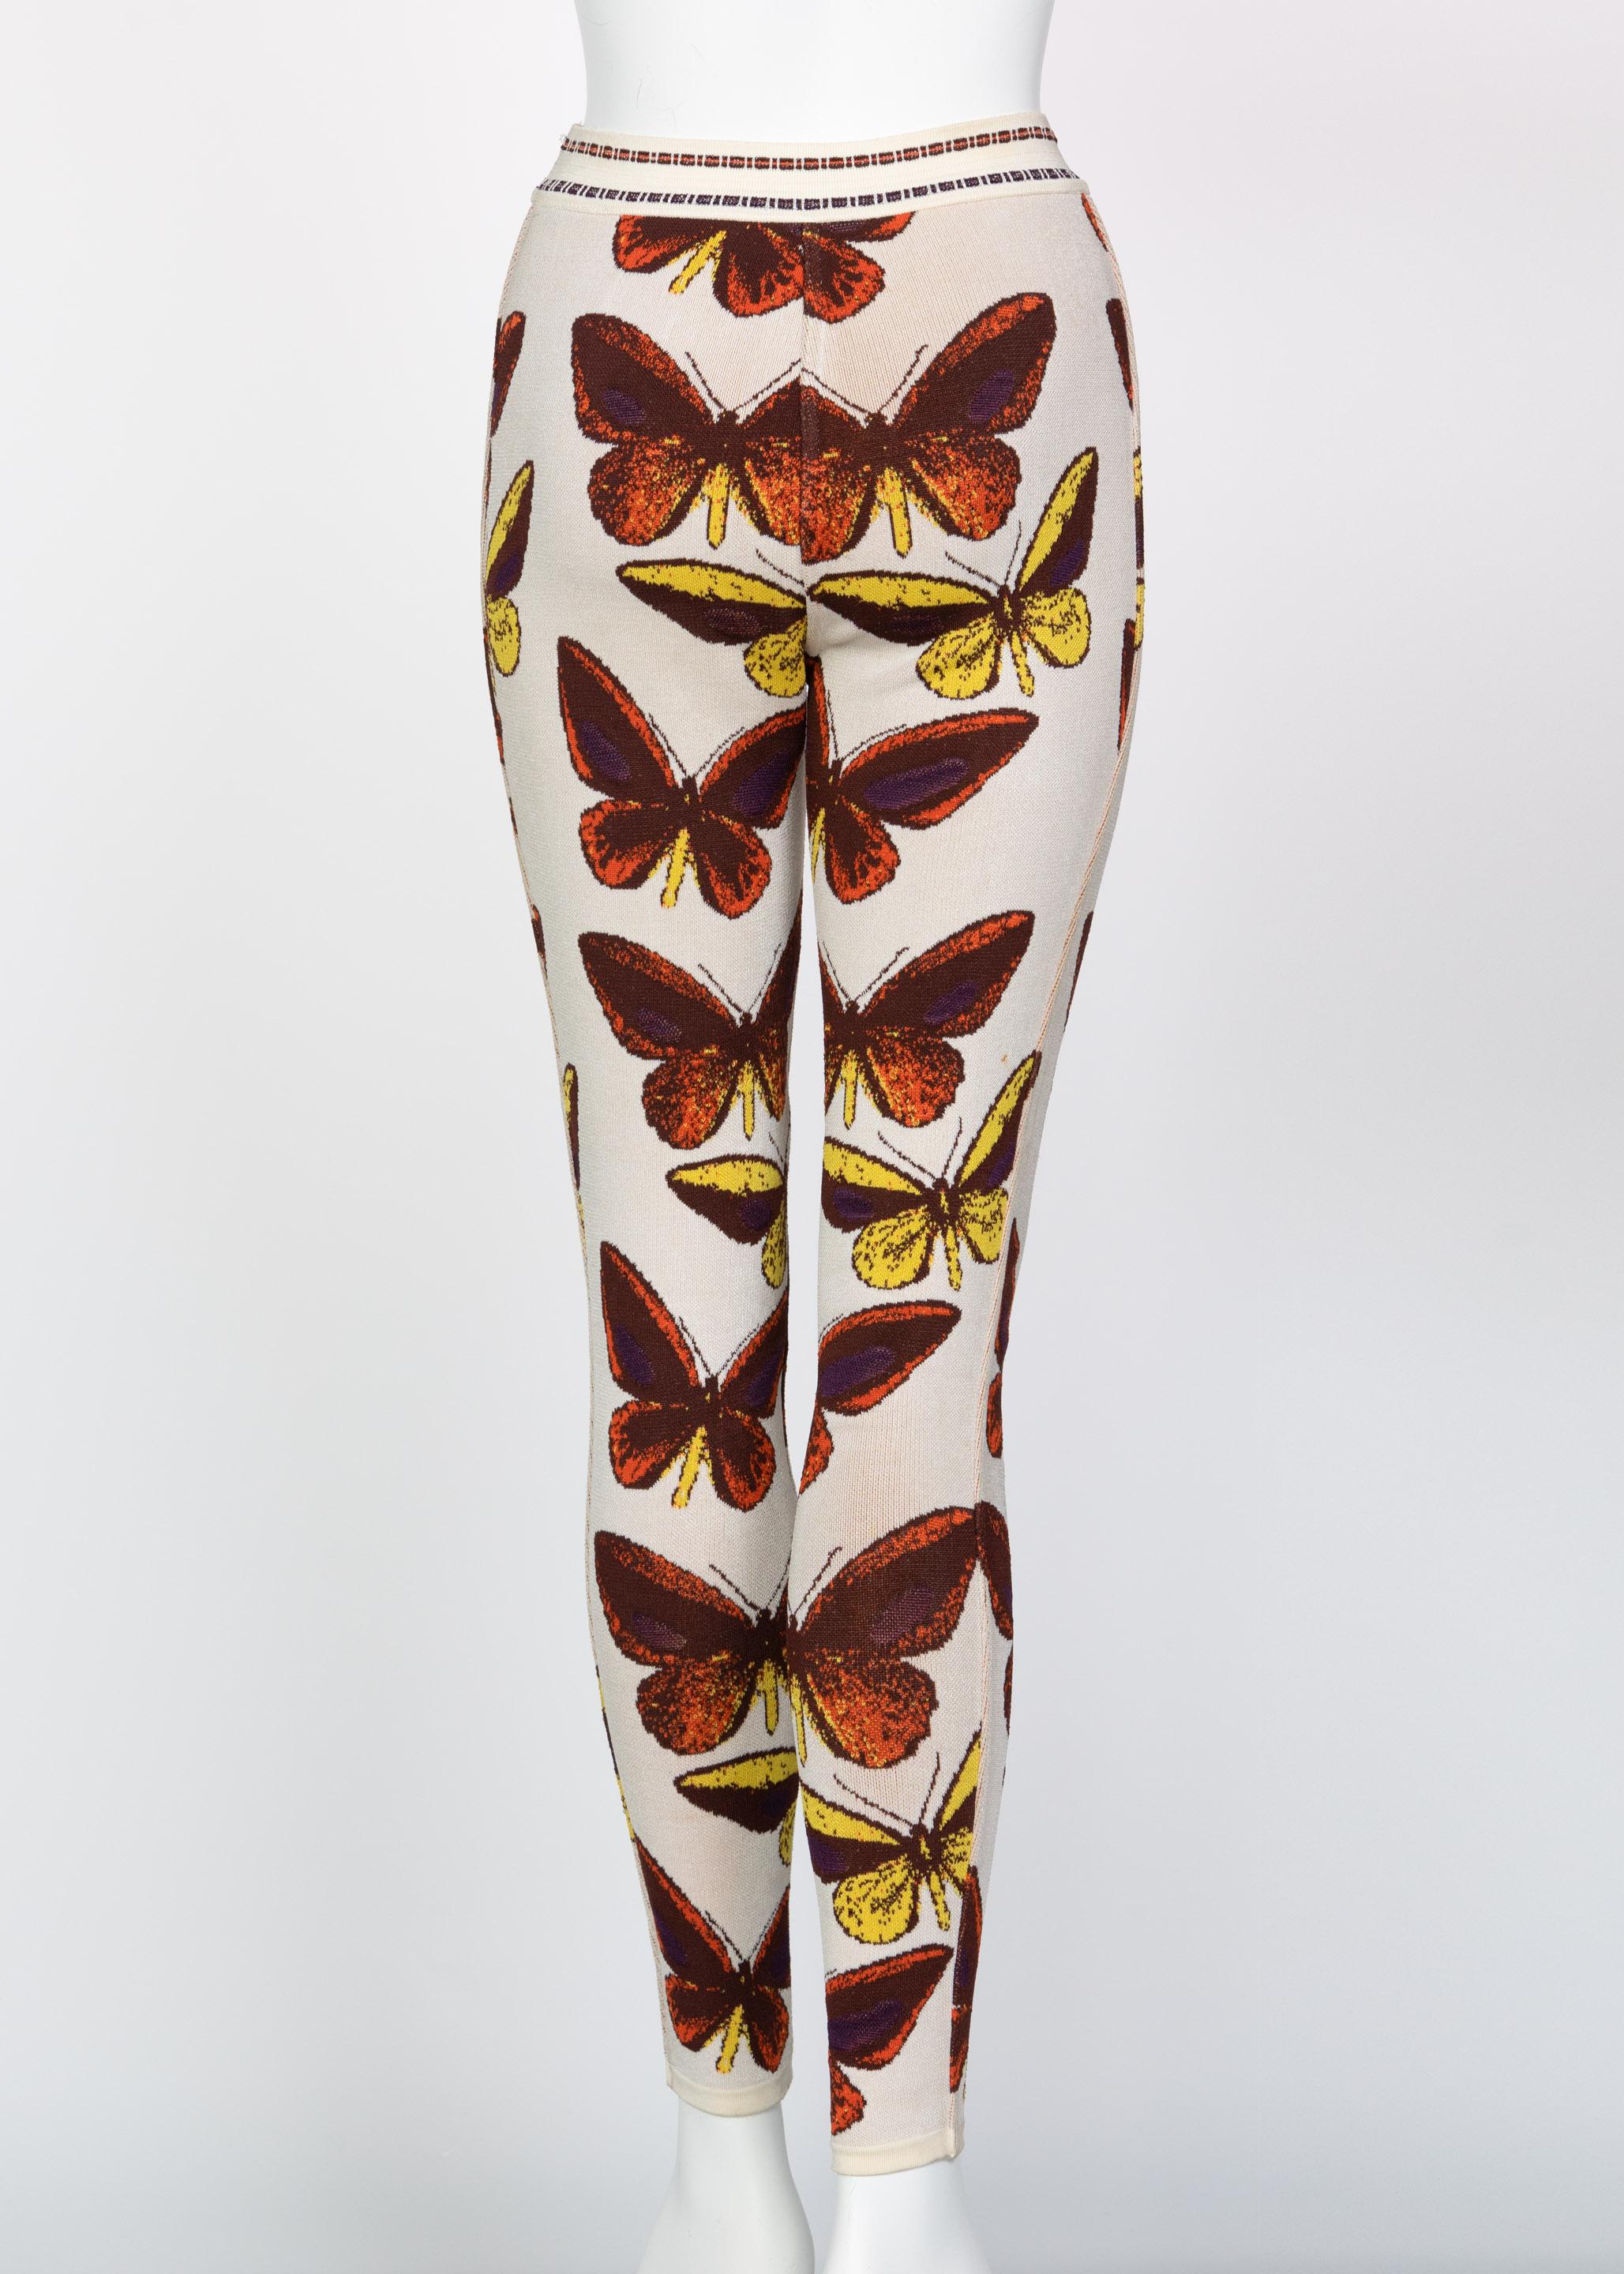 Azzedine Alaia Iconic Runway Butterfly Leggings, 1991 In Good Condition In Boca Raton, FL